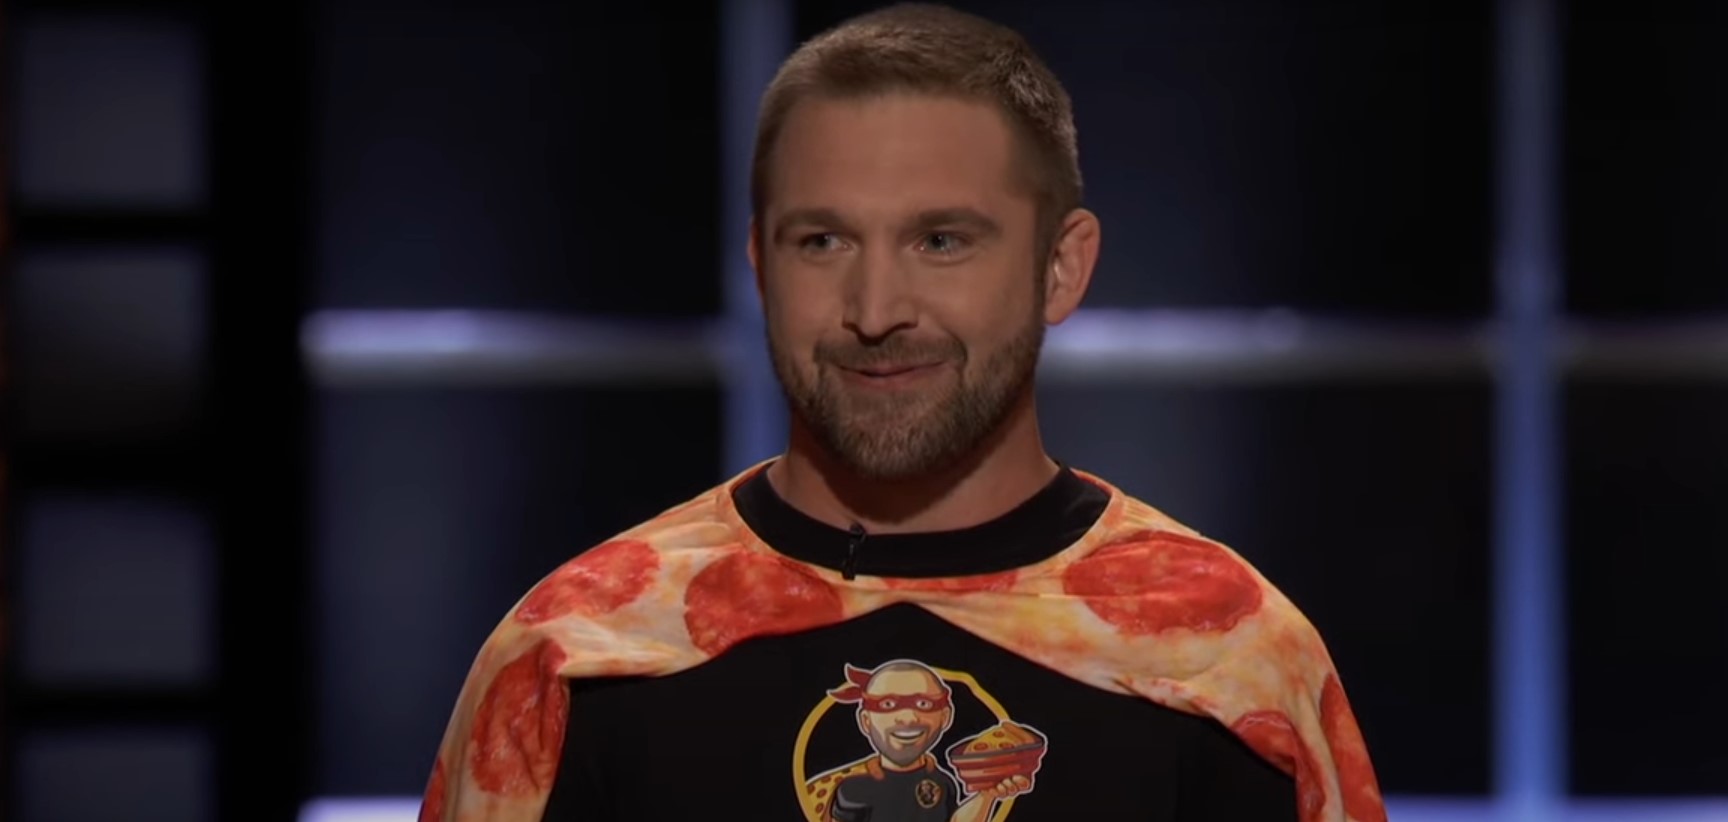 Viral Pizza Pack Container (Seen on Shark Tank) is Collapsible and Genius